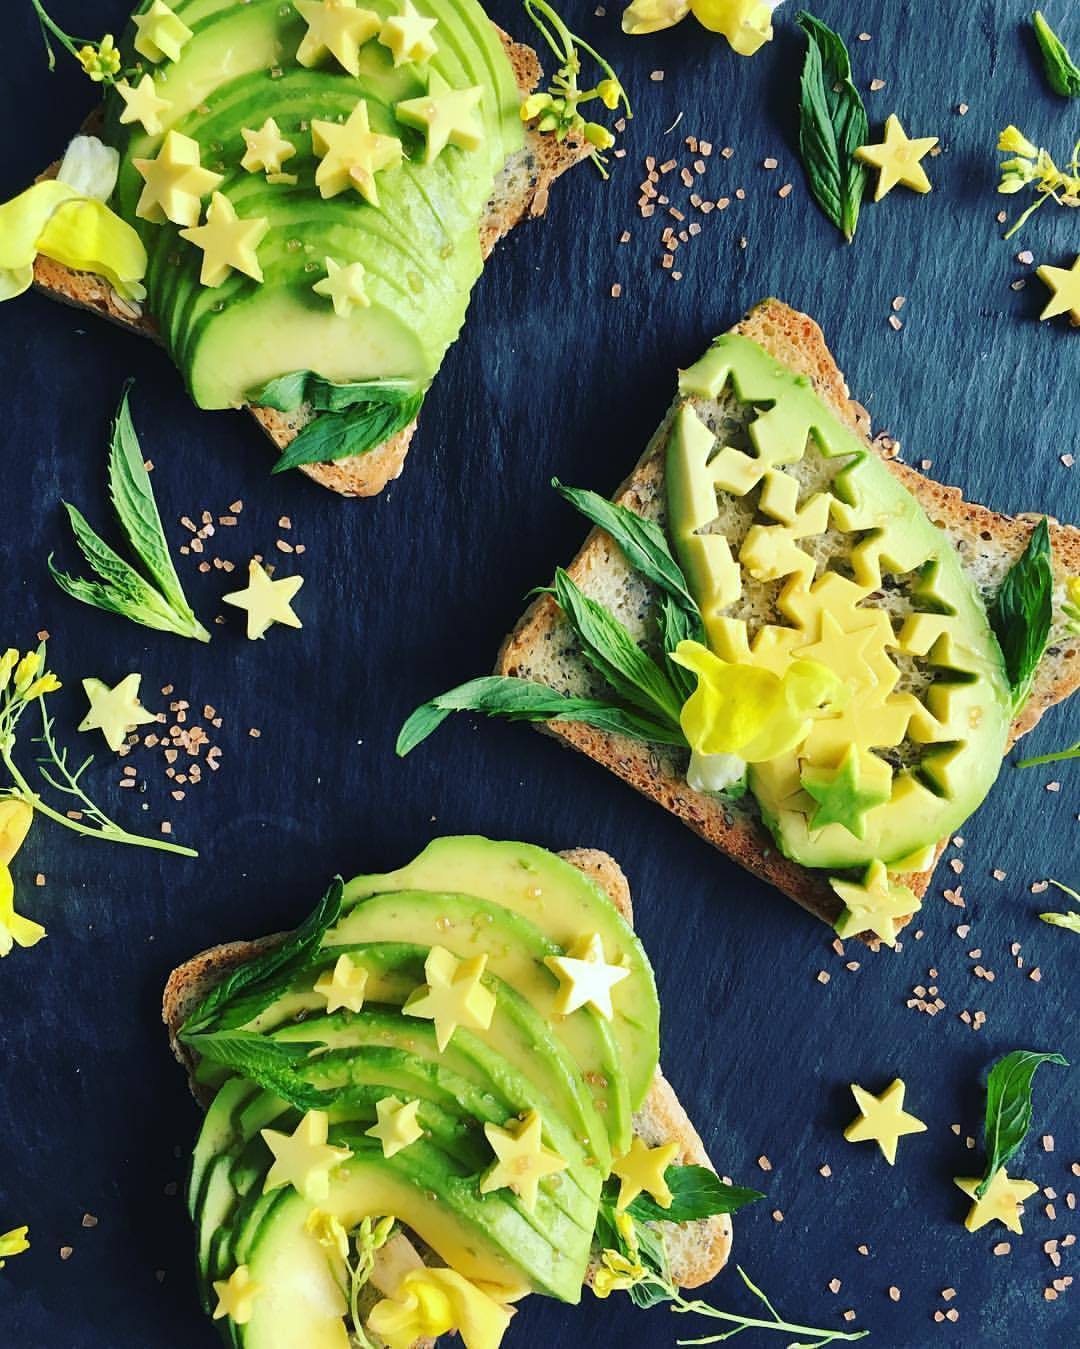 kate-loves-kale: letscookvegan: Star-shaped Avocado Toasts by @the_sunkissed_kitchen